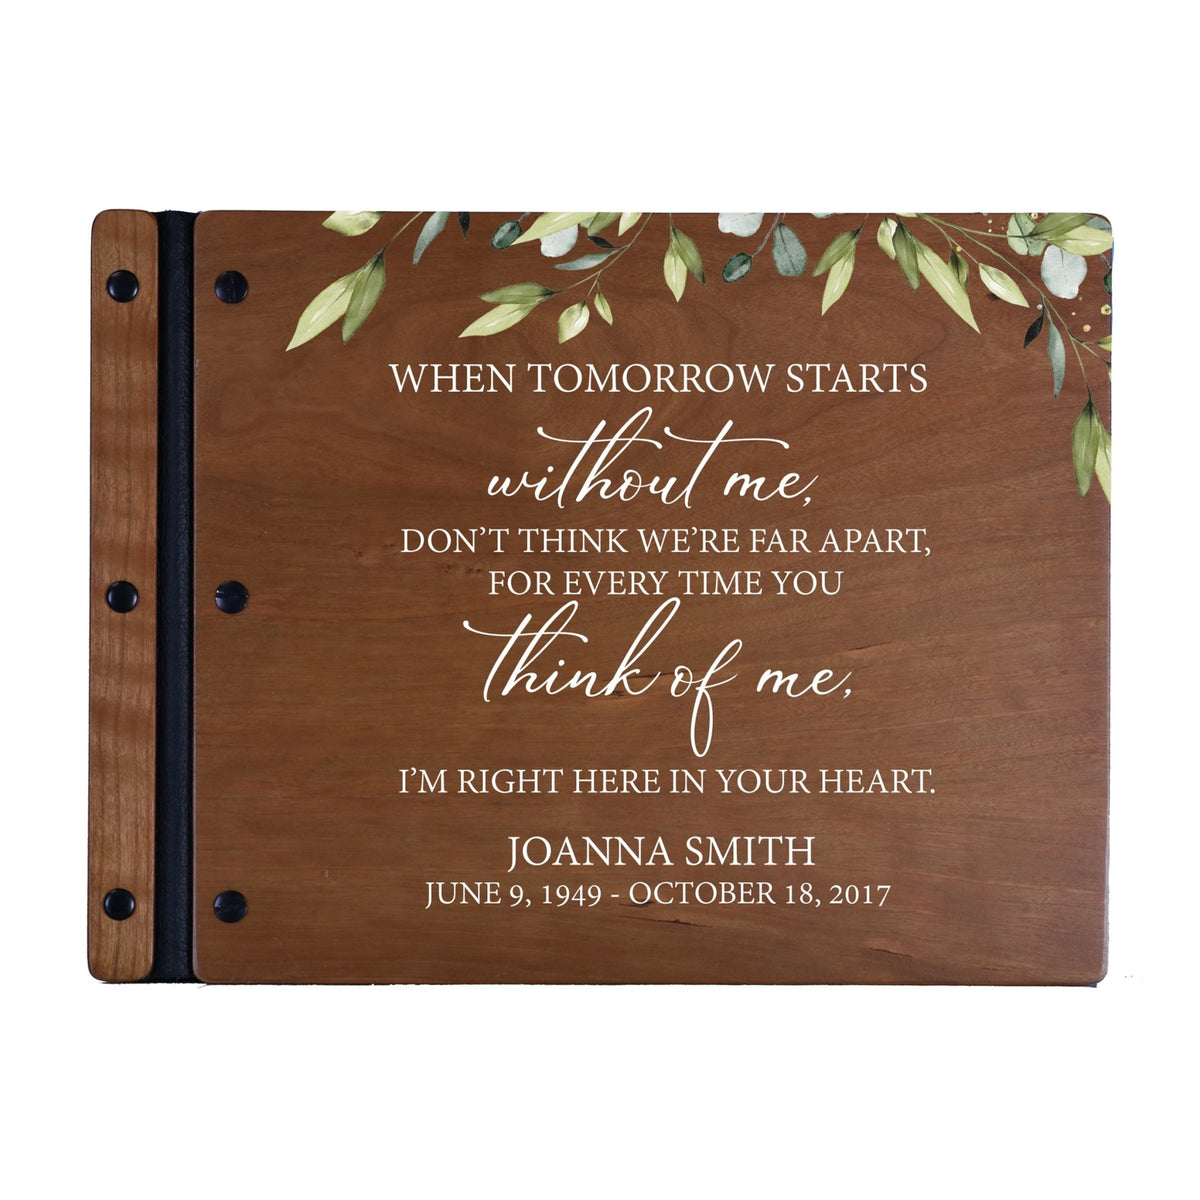 Custom Large Wooden Memorial Guestbook 13.375x10in - When Tomorrow Starts - LifeSong Milestones